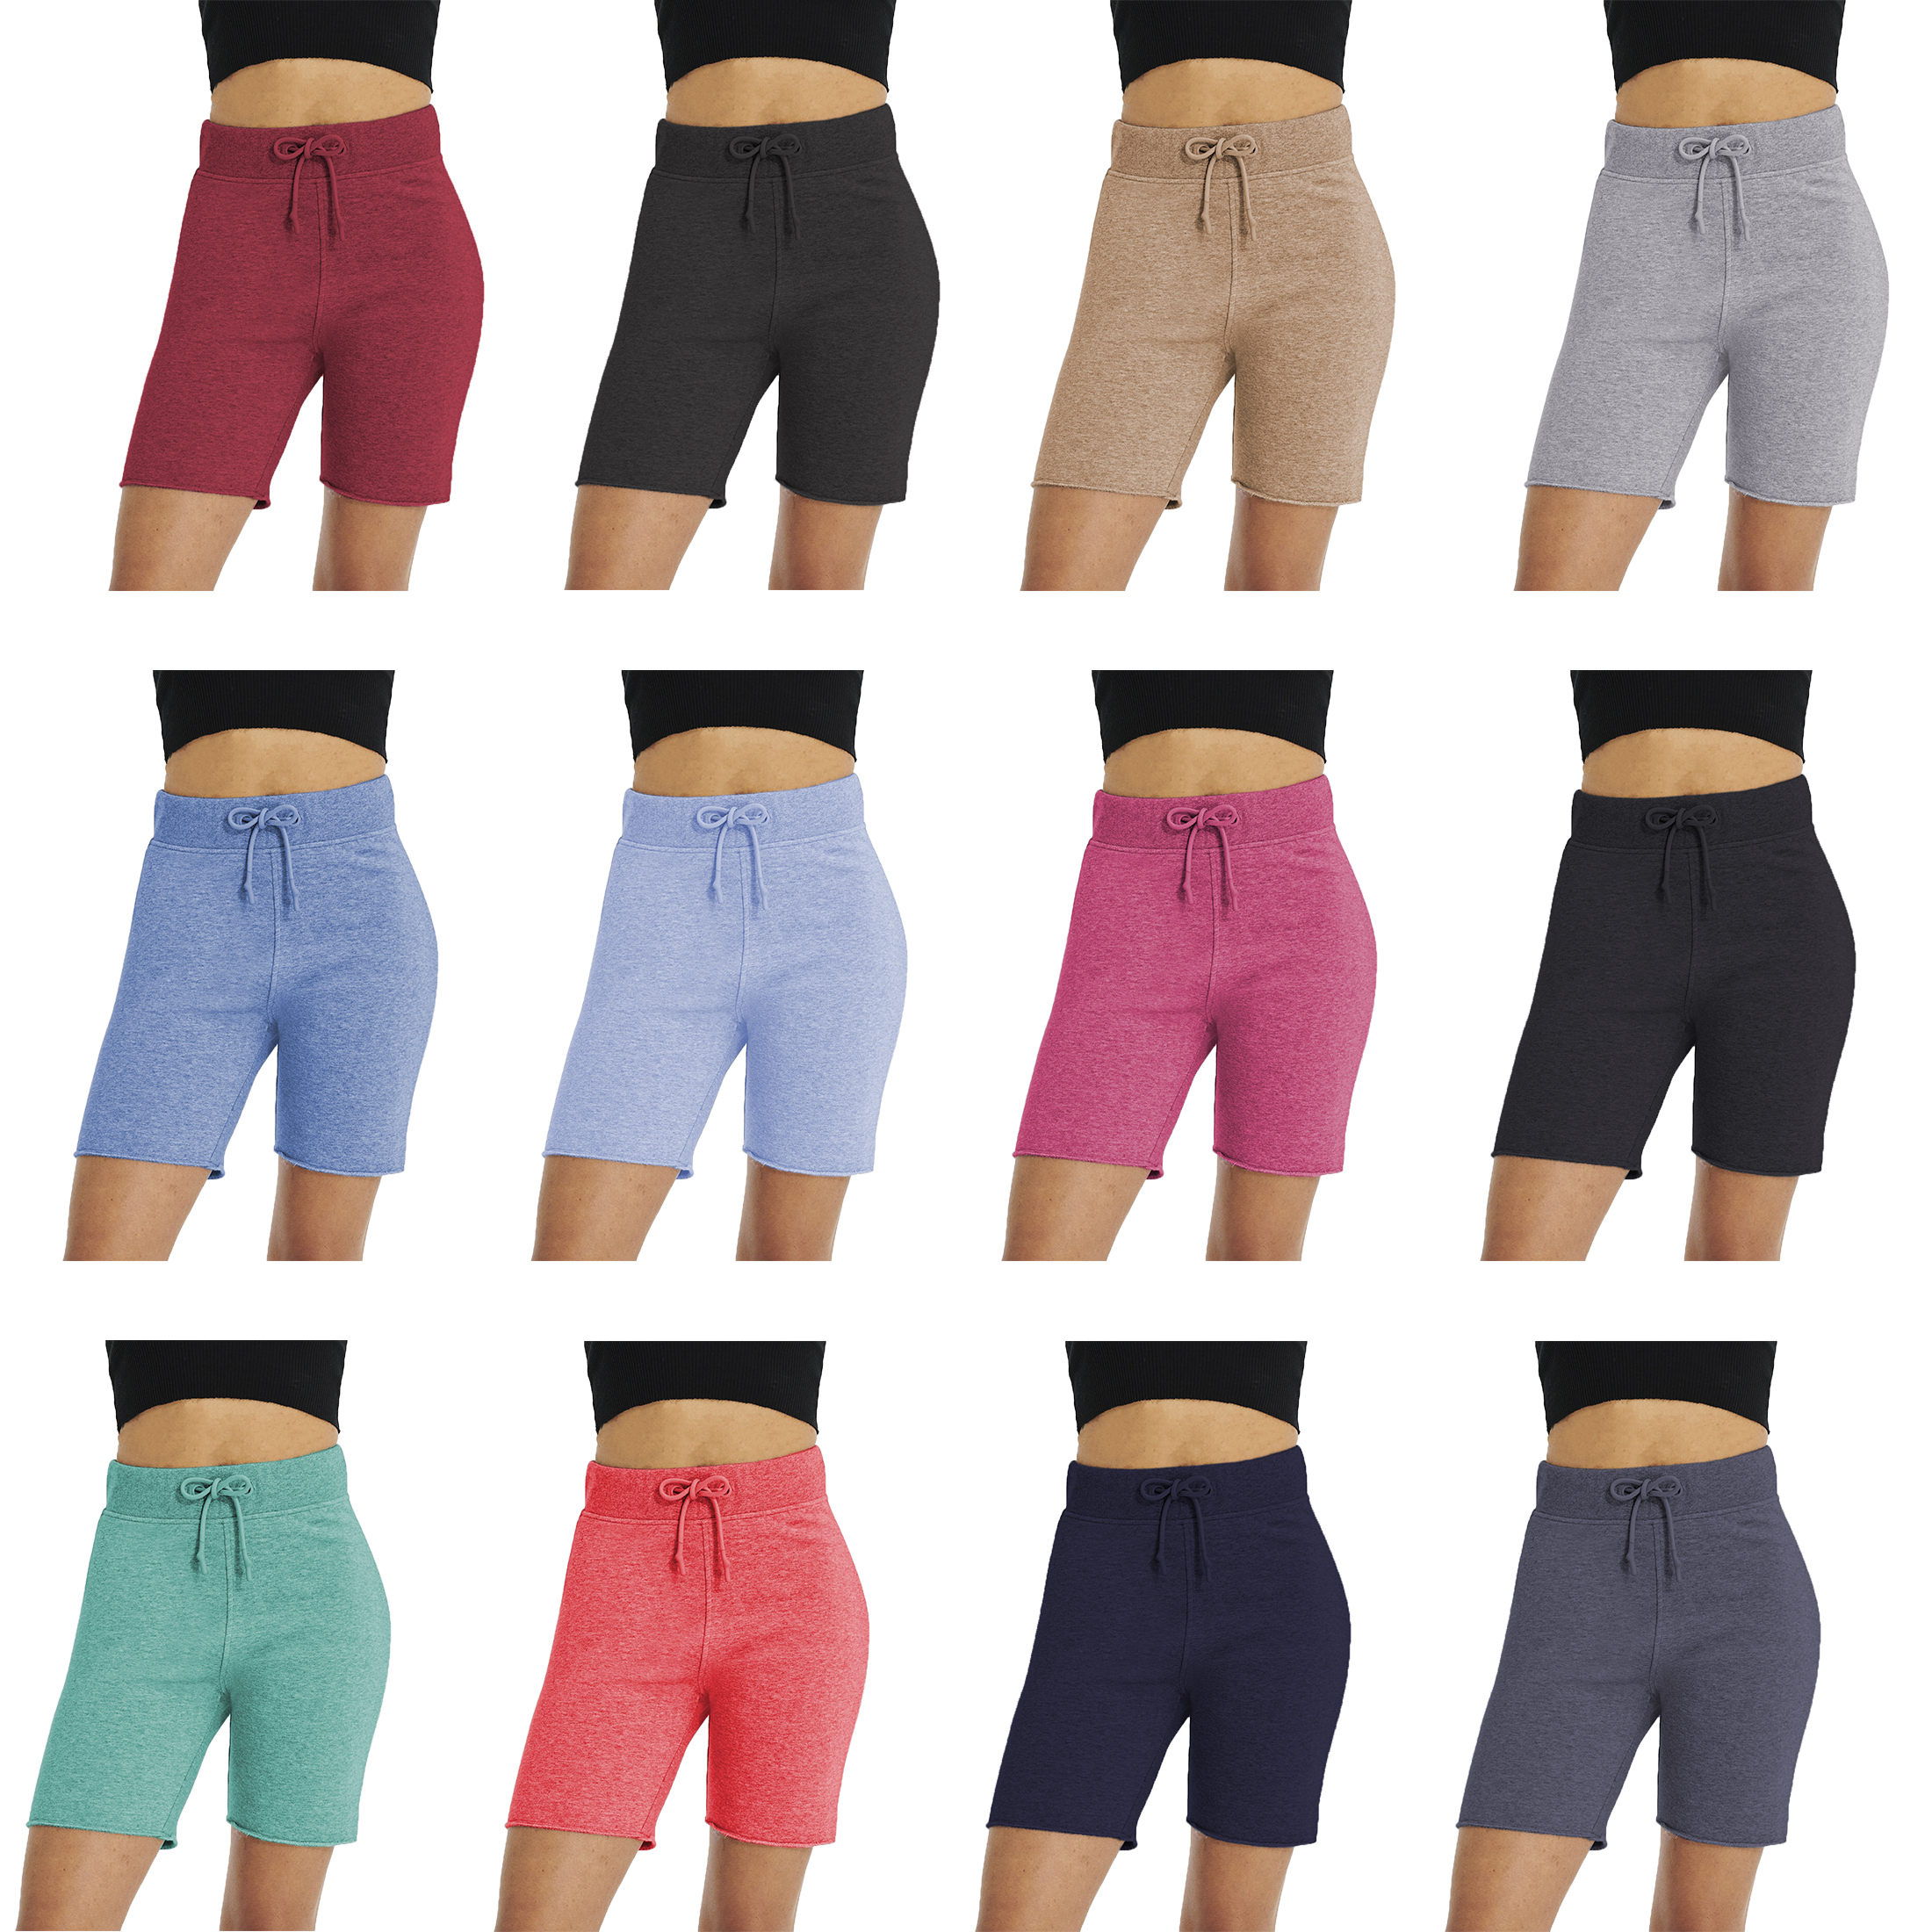 3-Pack: Ladies Soft Summer Stretch Active Athletic Lounge Sports Workout Bermuda Shorts - Large